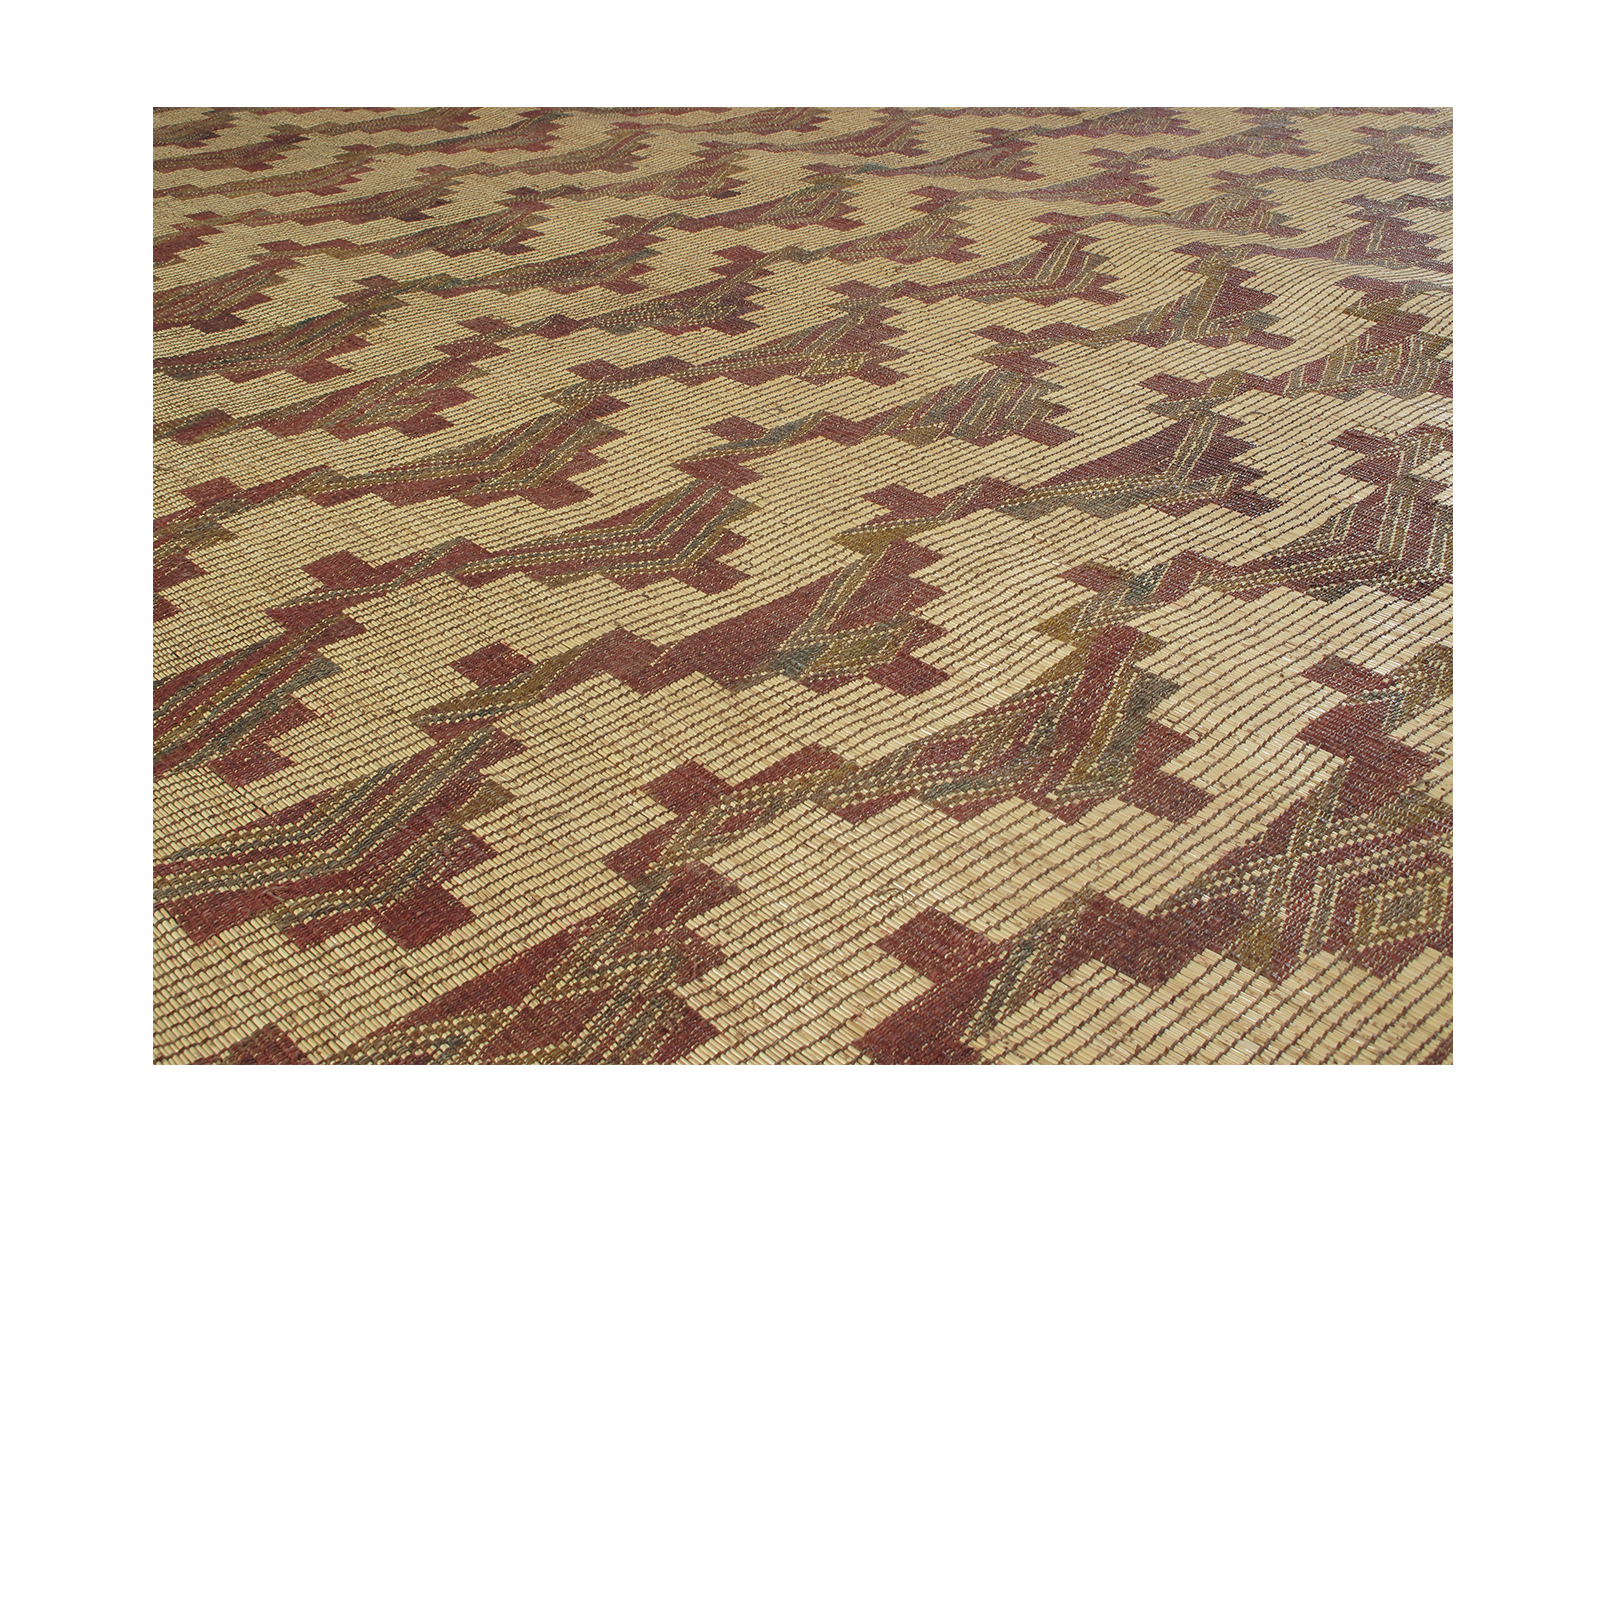 This Tuareg mat is hand-woven and made of palm,reeds and leather. 